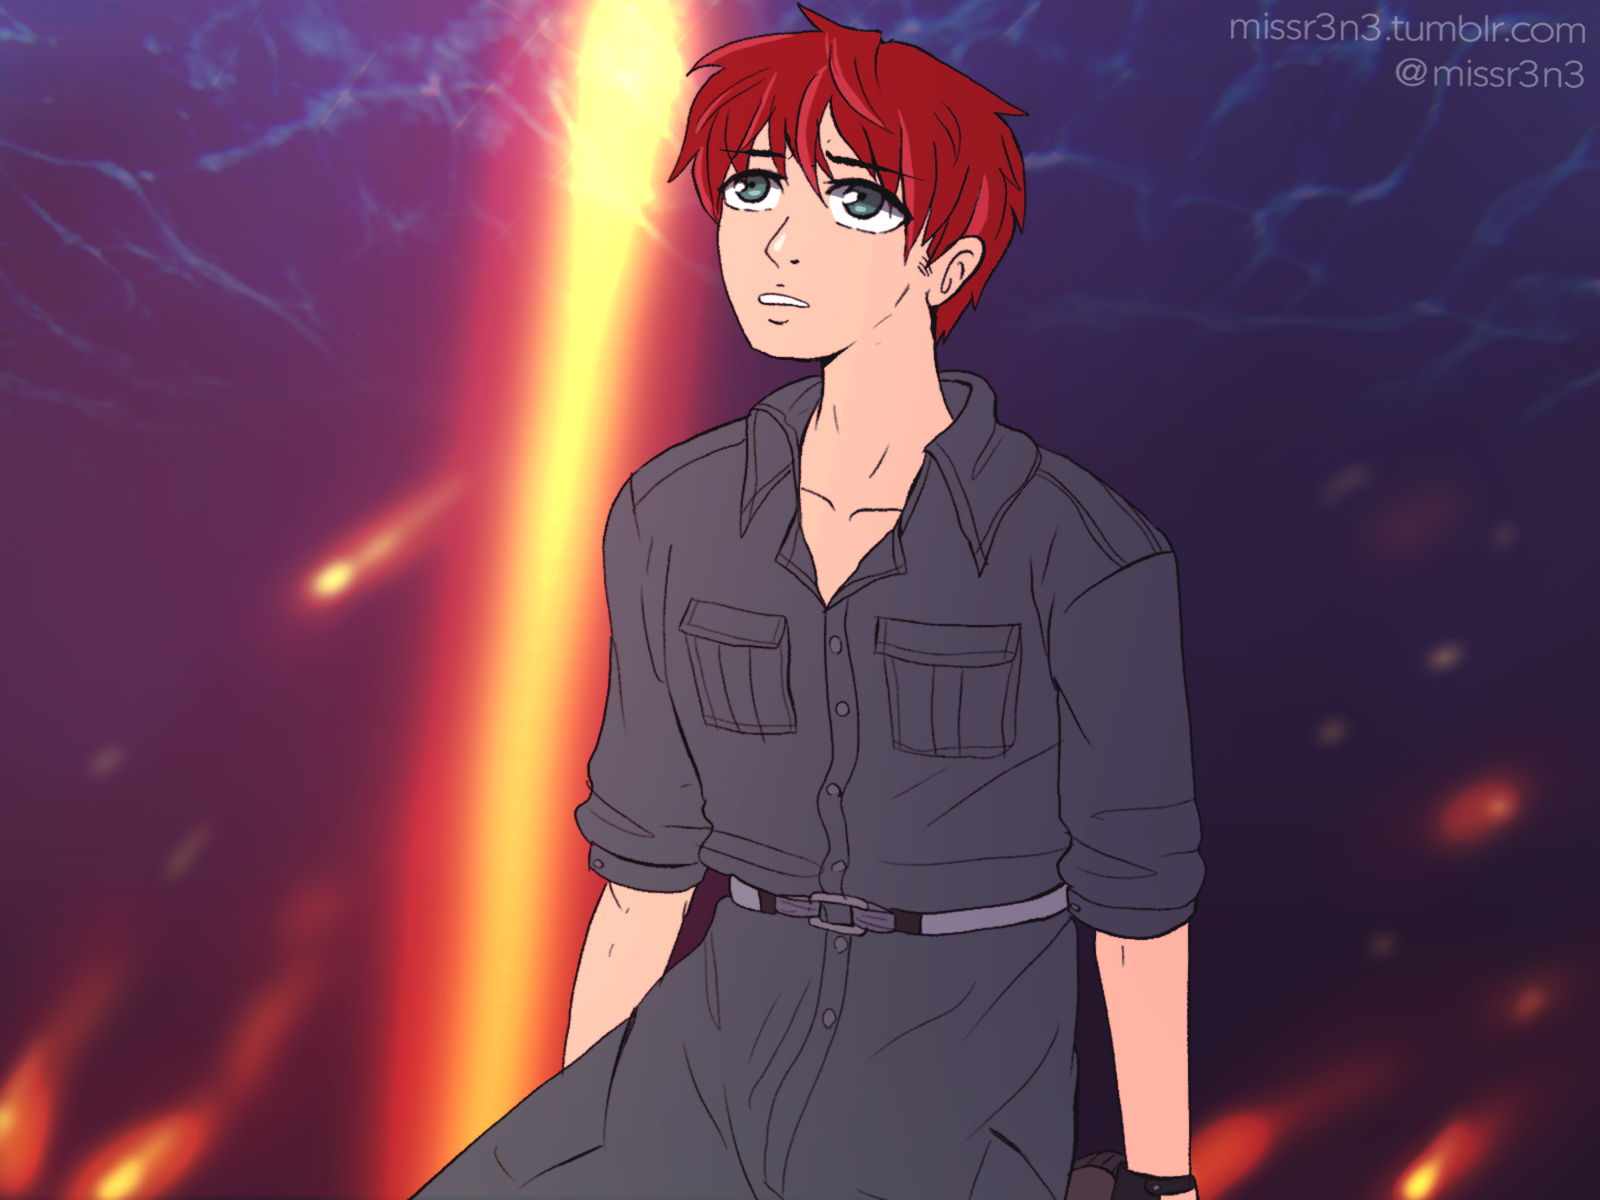 a drawing of stray kids' chan in the style of the tower of god anime